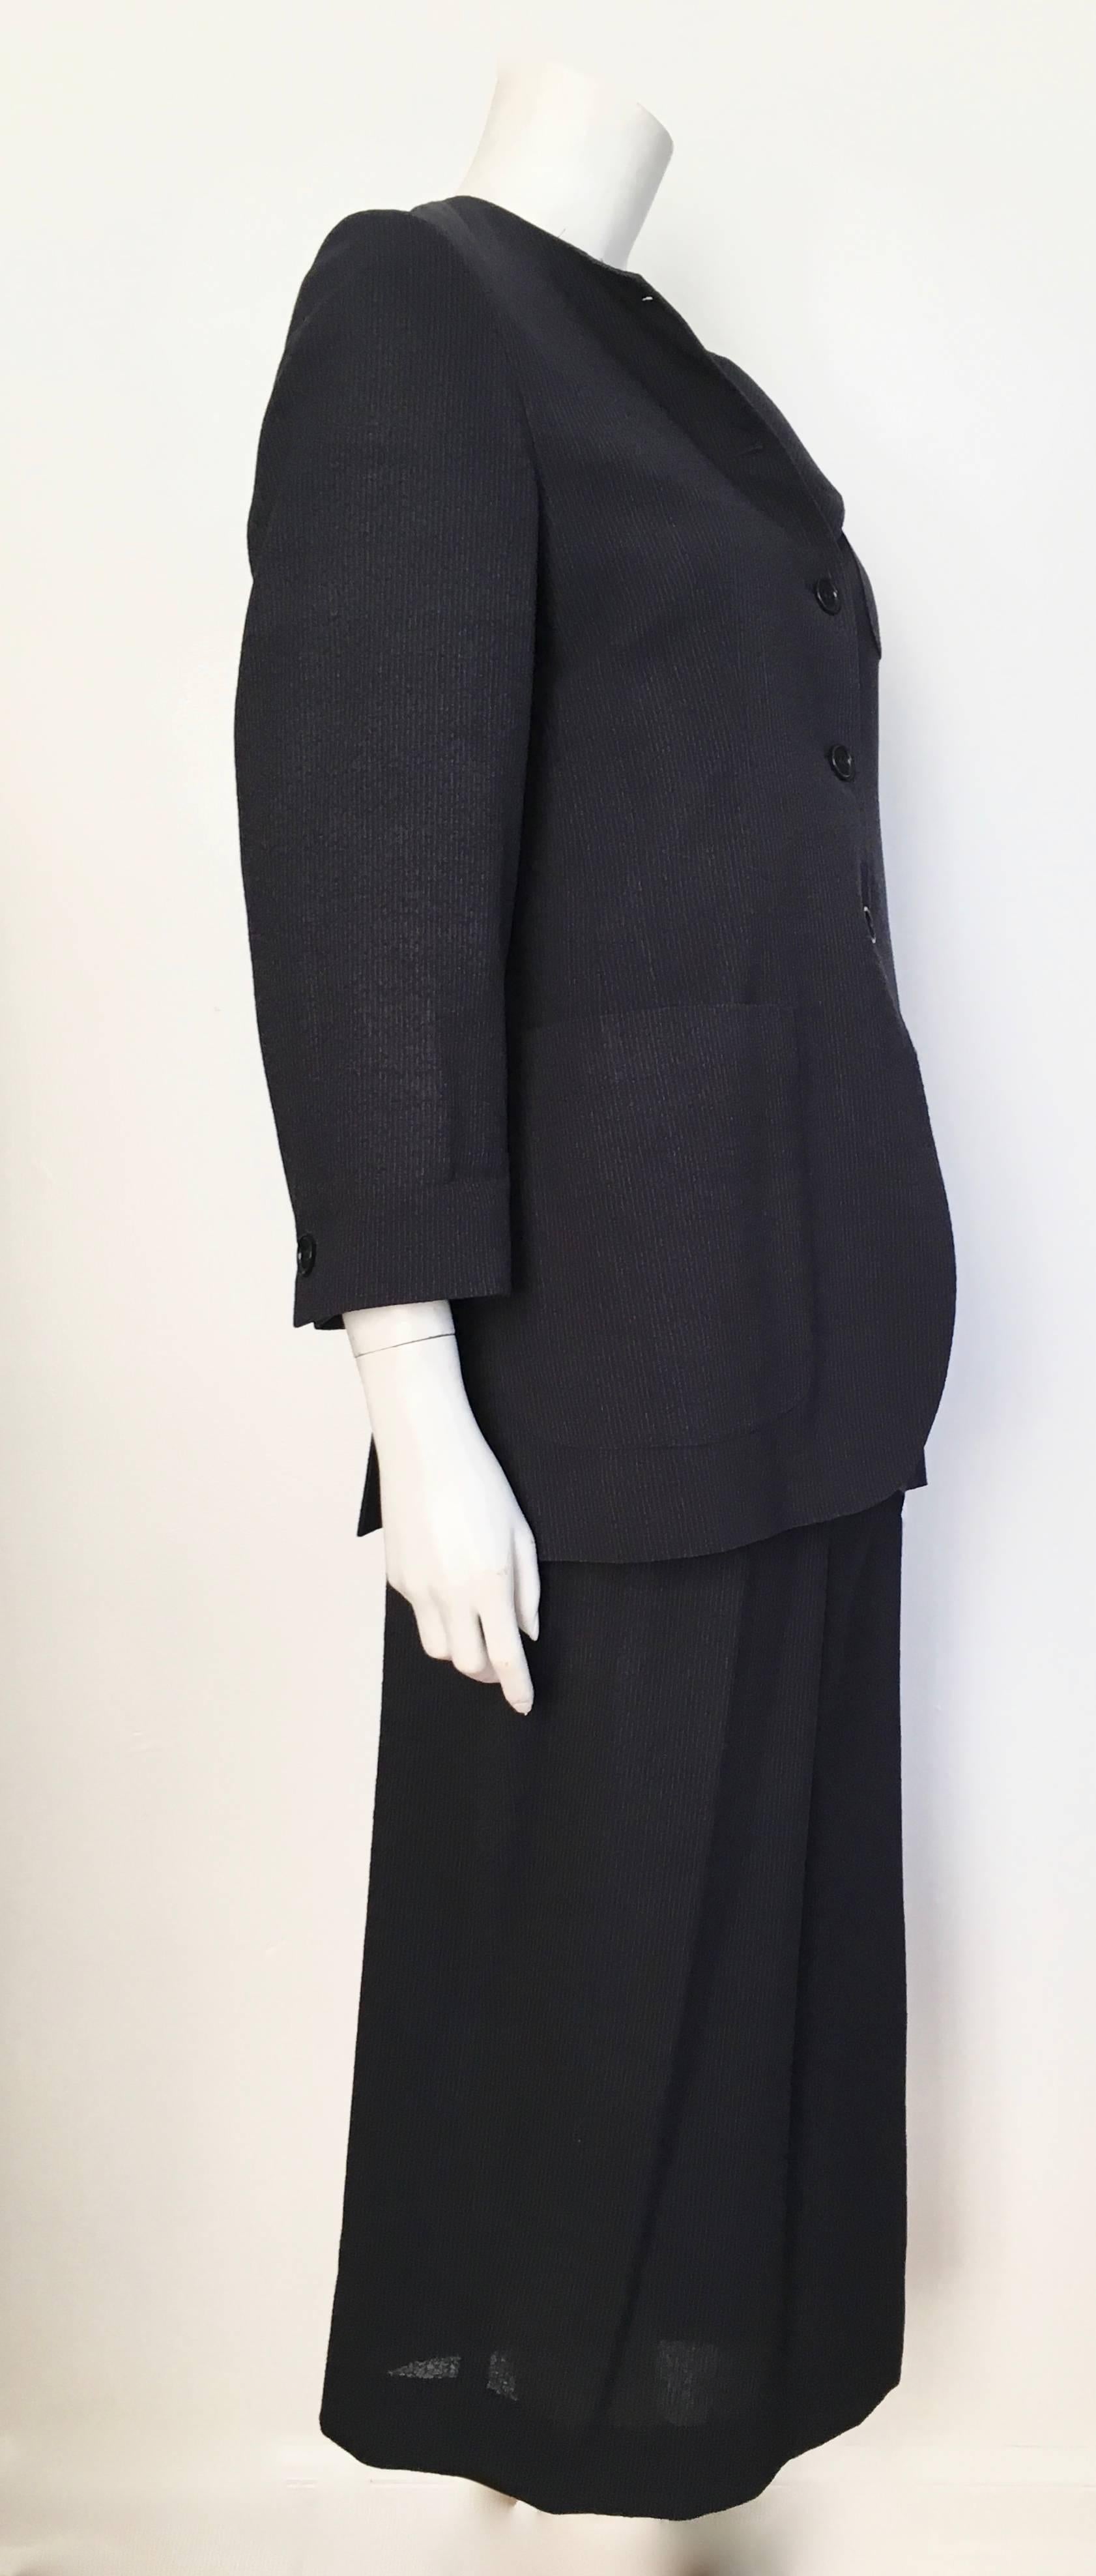 Black Romeo Gigli 1980s Wool Navy Jacket & Wrap Skirt Suit Size 6. For Sale